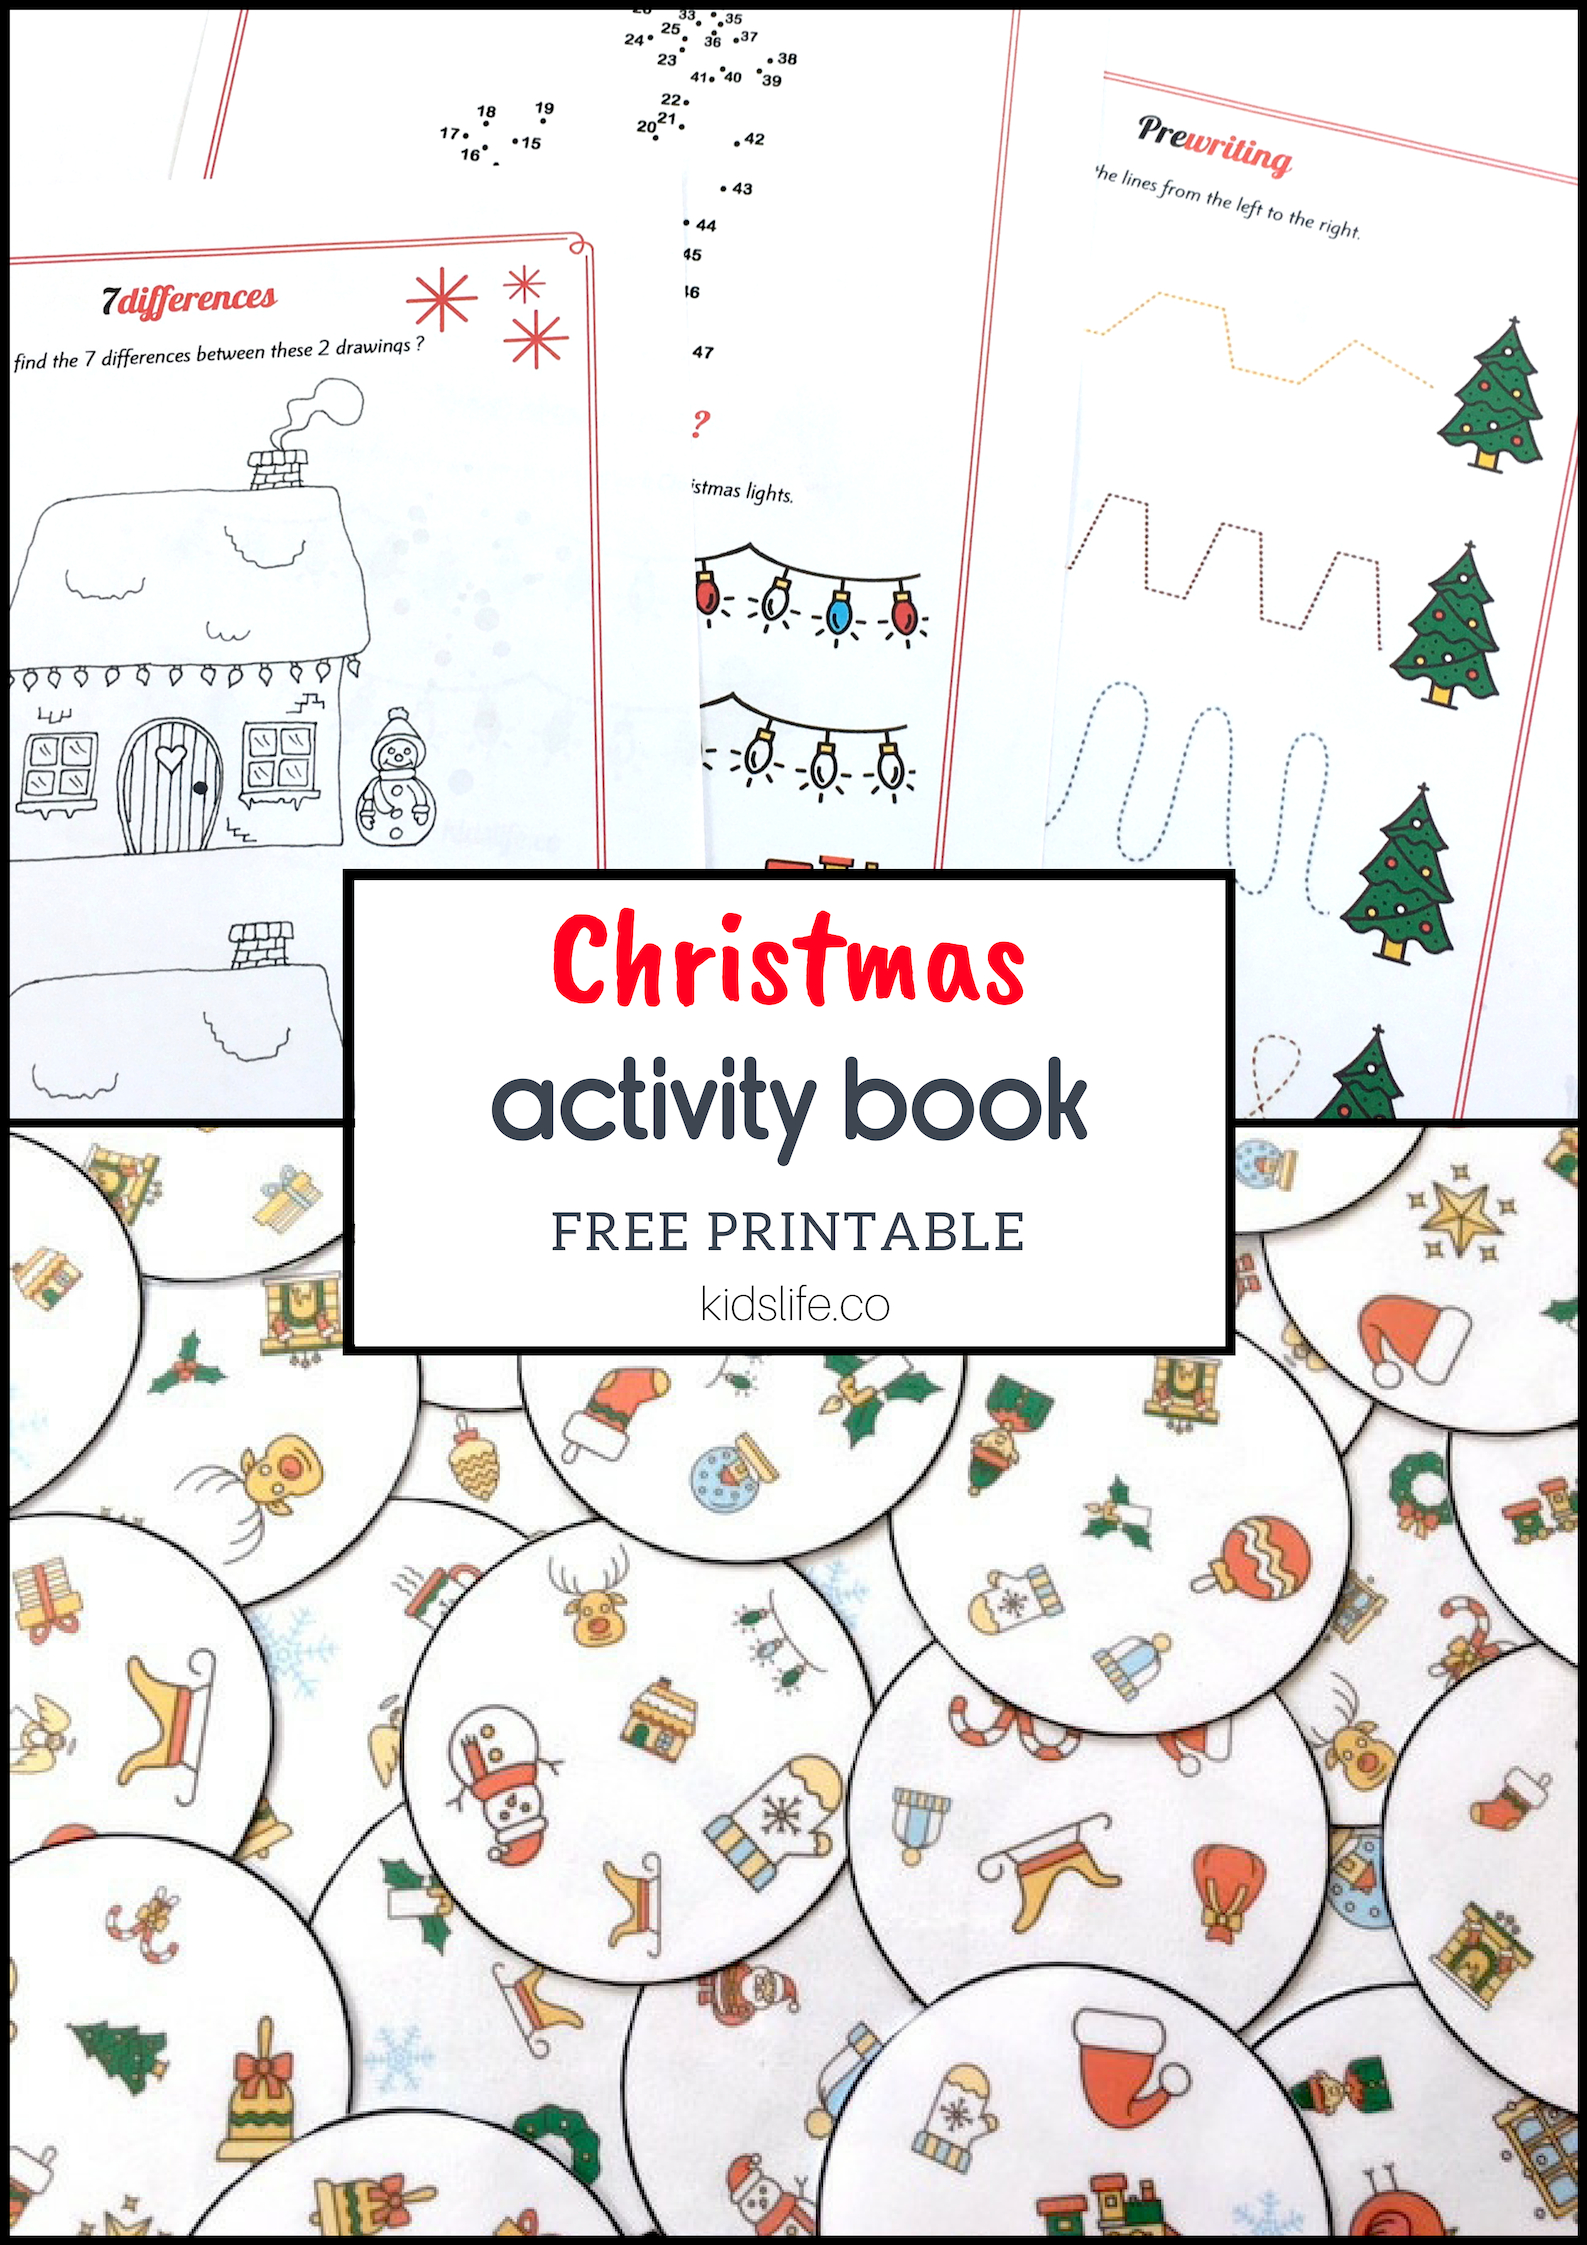 a-so-much-fun-christmas-activity-book-free-printable-kidslife